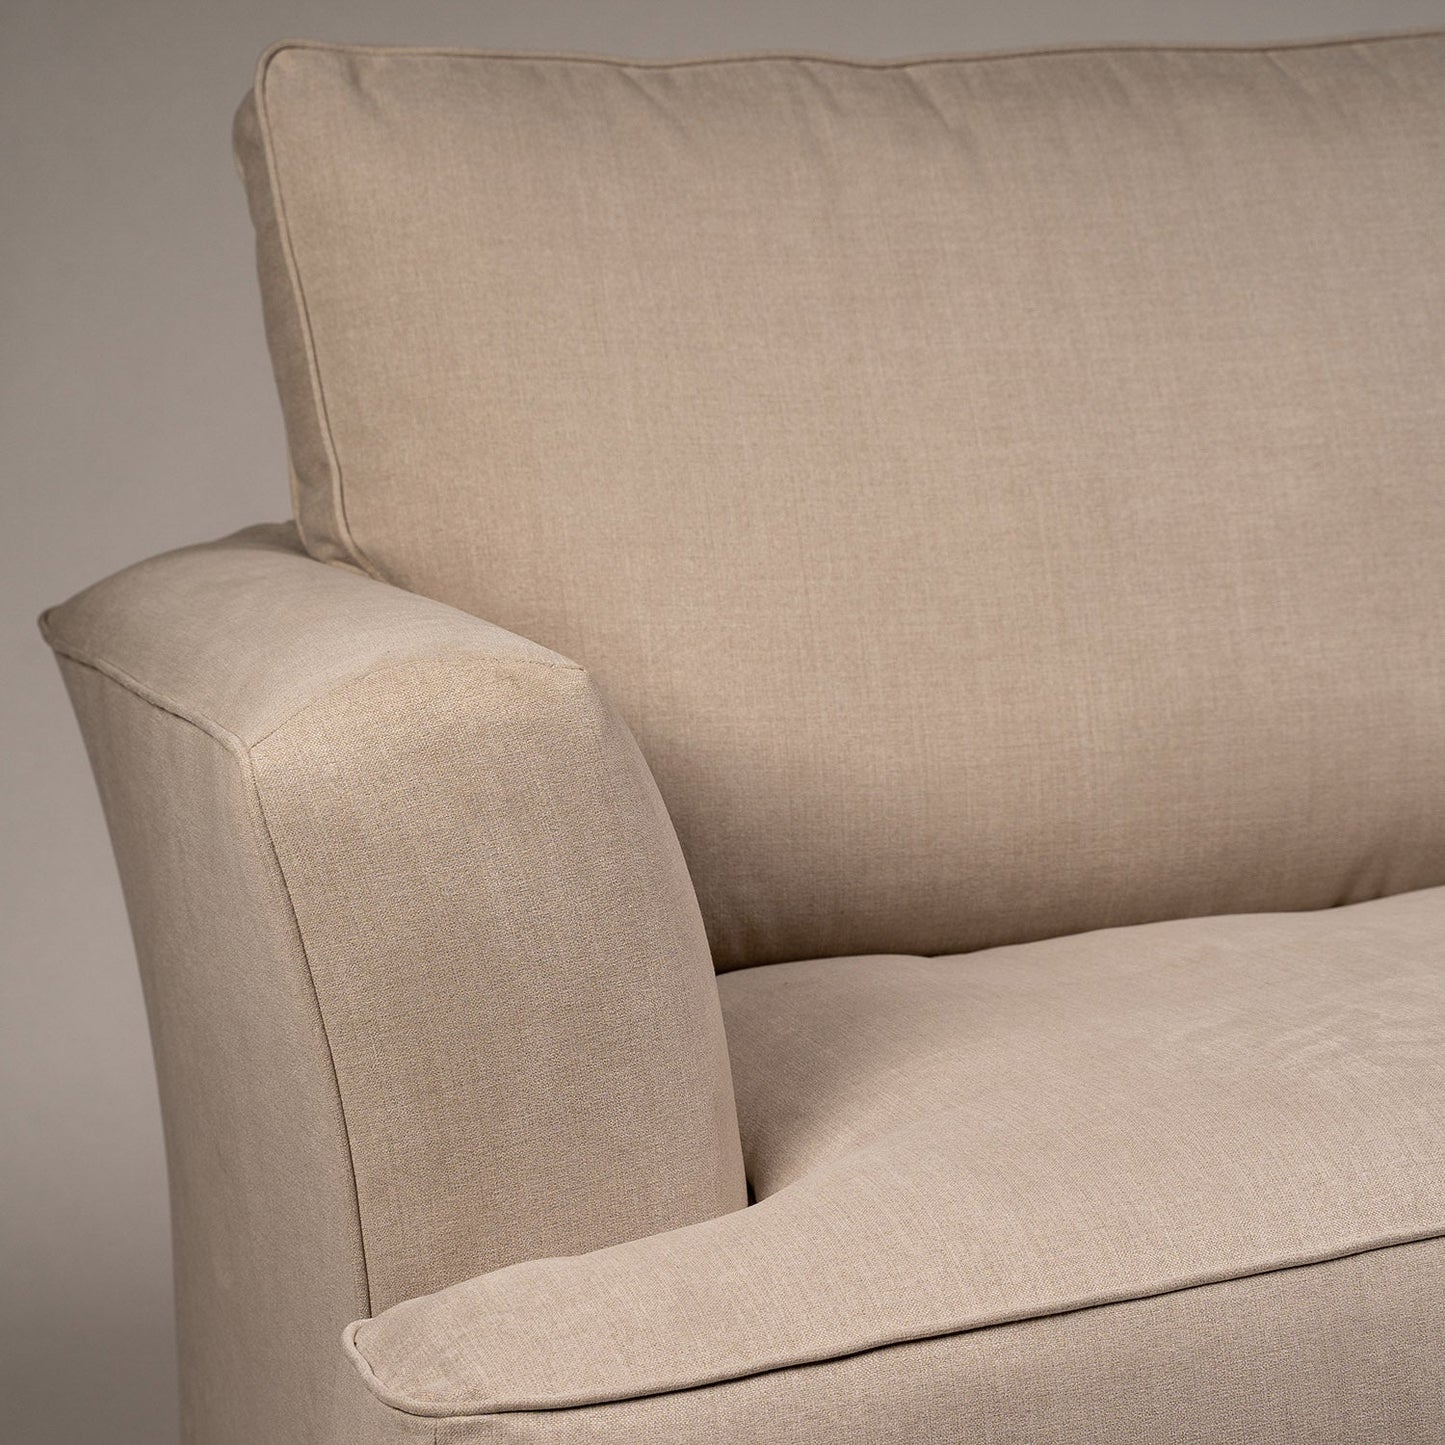 Frankie small sofa - 2 seater - Natural Clay